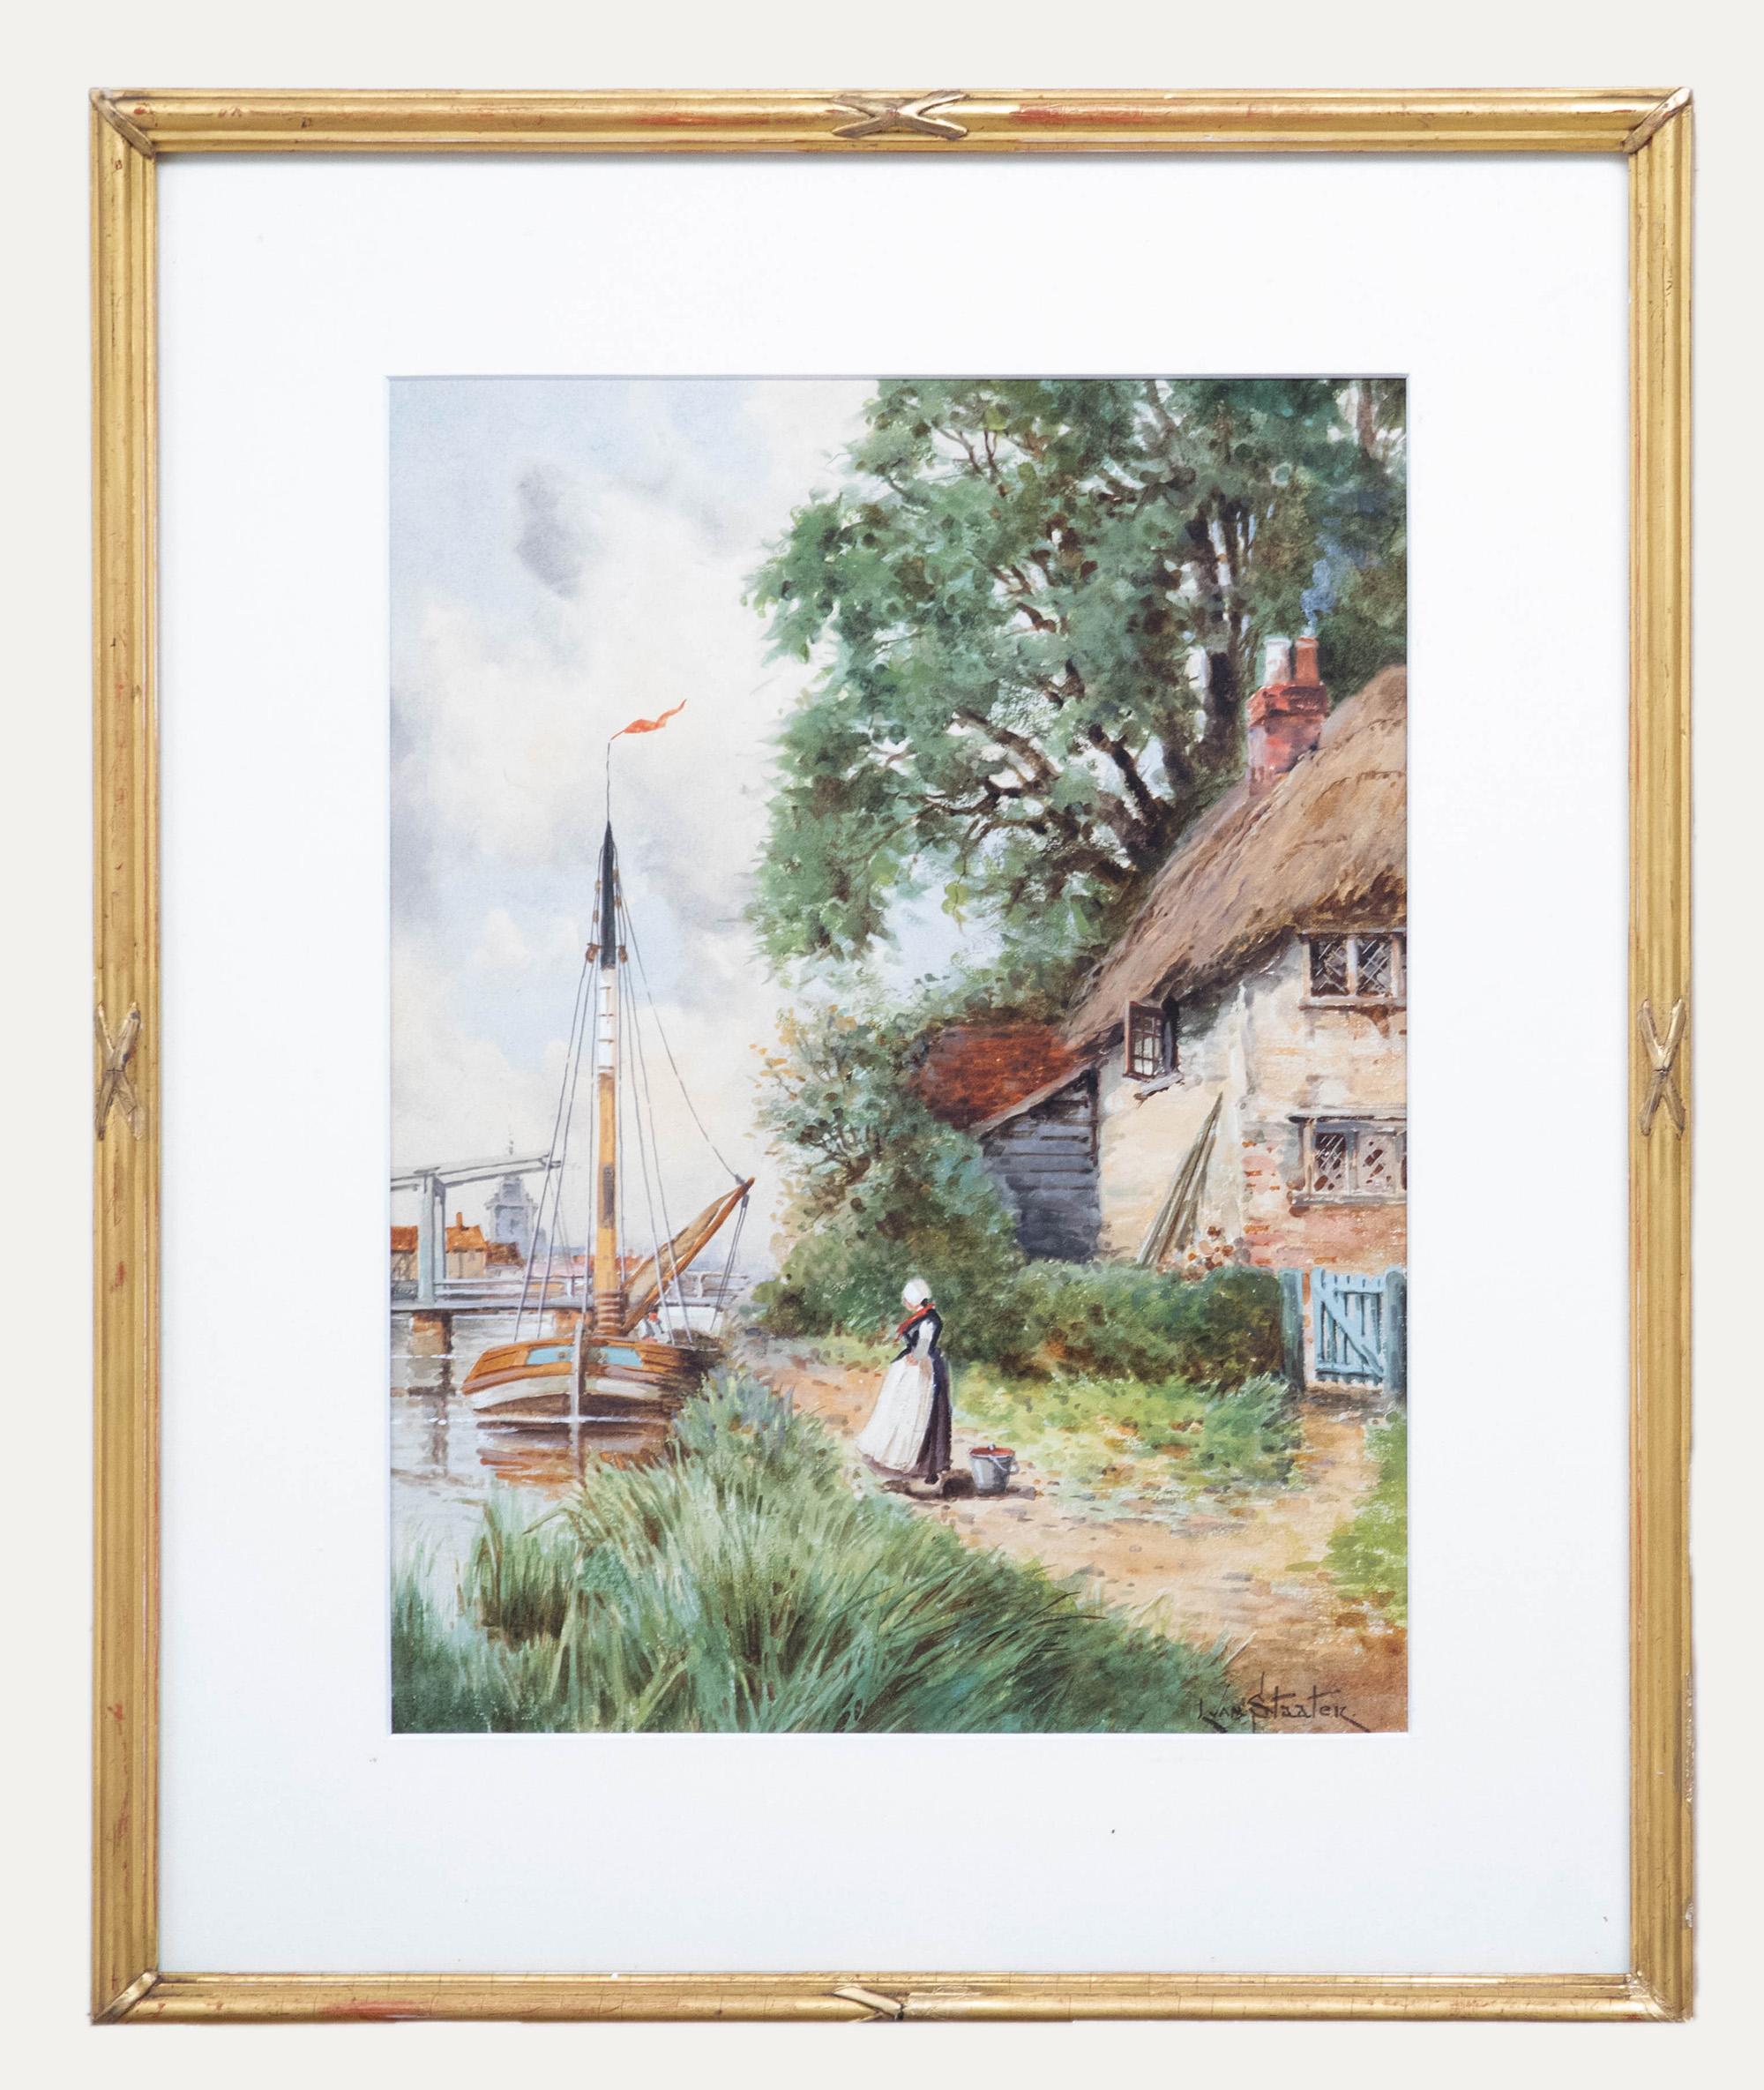 An original watercolour painting by the Dutch landscape artist Louis Van Staaten, also known as Hermanus II Koekkoek (1836-1909). Signed to the lower right. Well-presented in a decorative gilt-effect frame with cross banding ornamentation. On